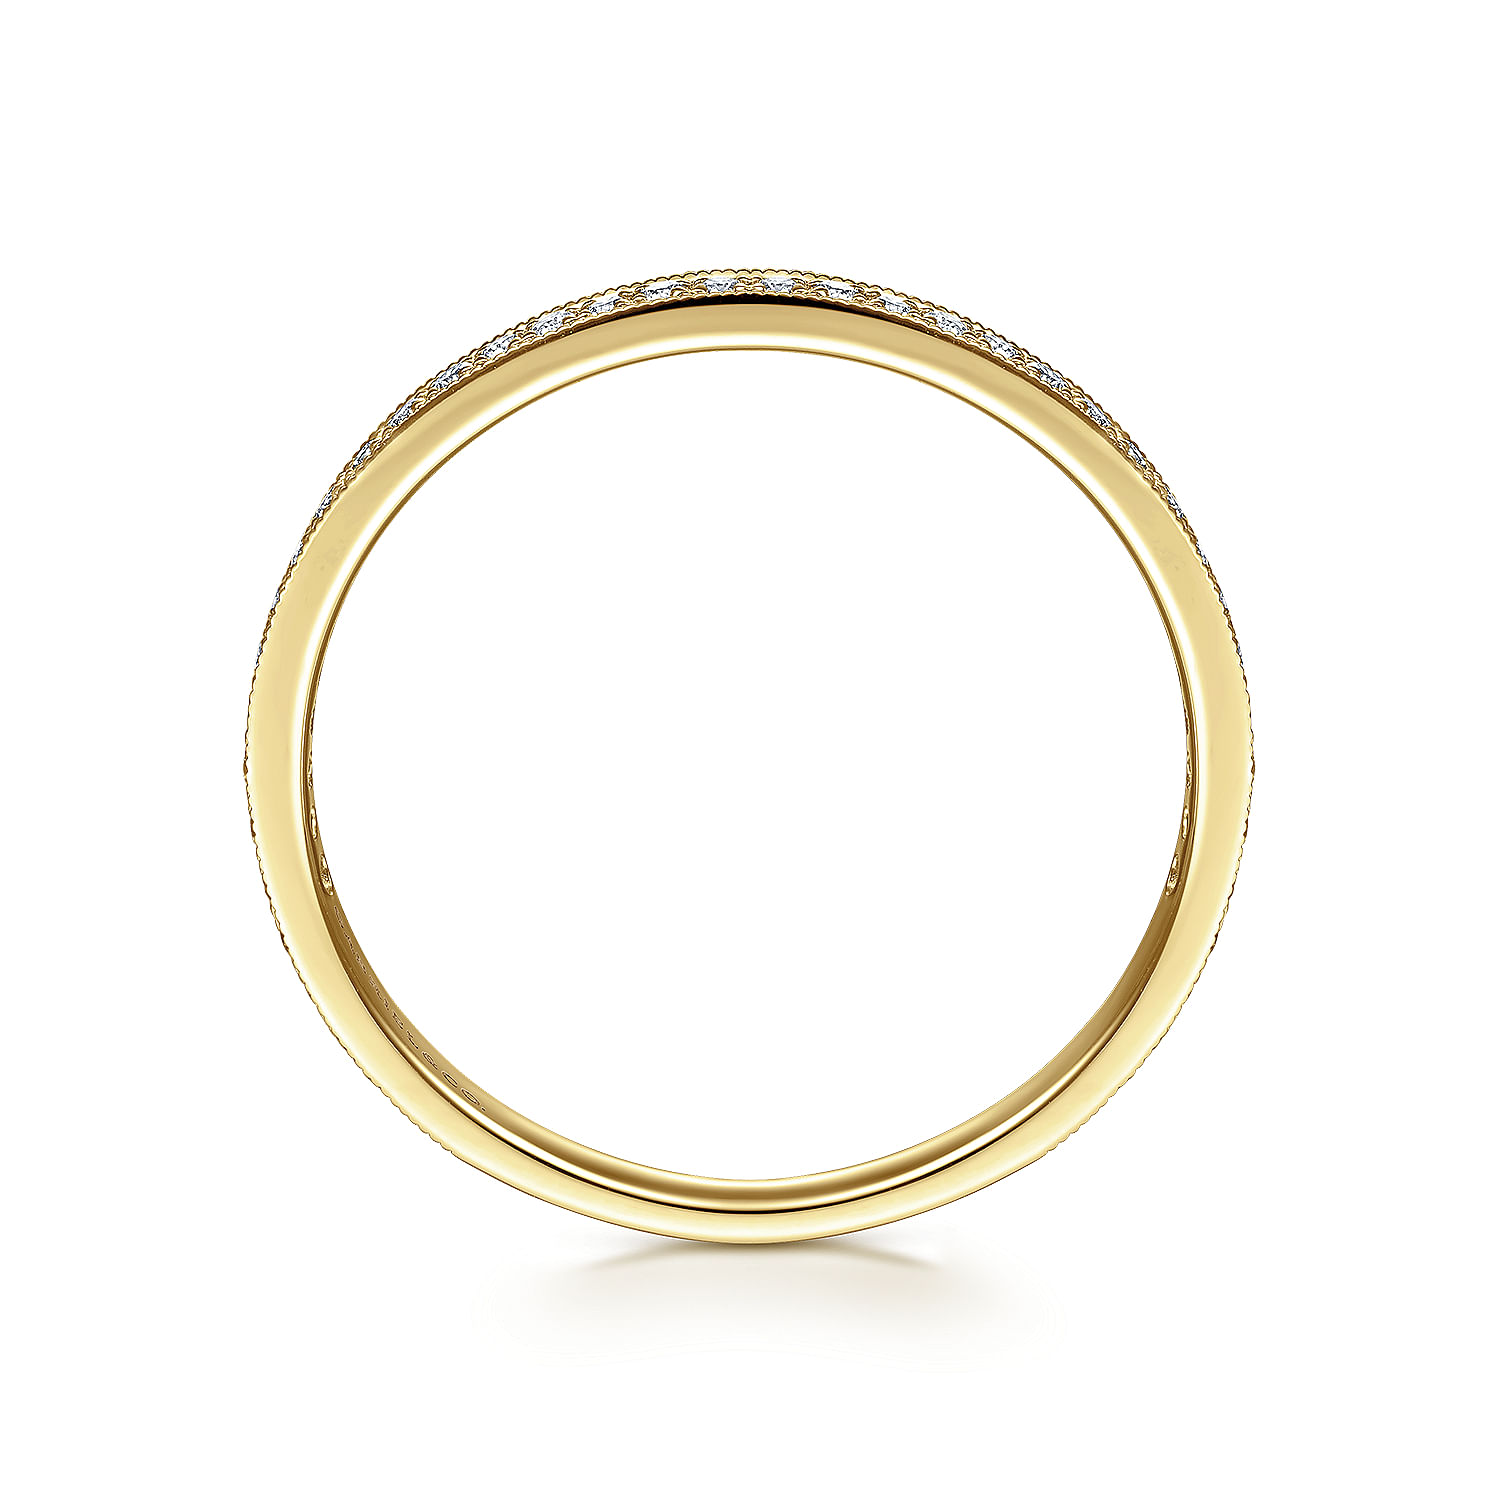 14K Yellow Gold Pavé Diamond Eternity Stackable Ring